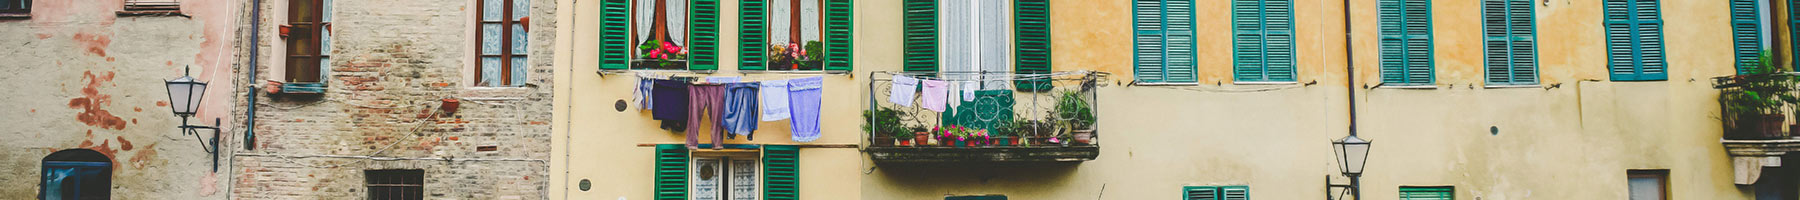 laundry hanging outside an apartment building window and flowers in a window box